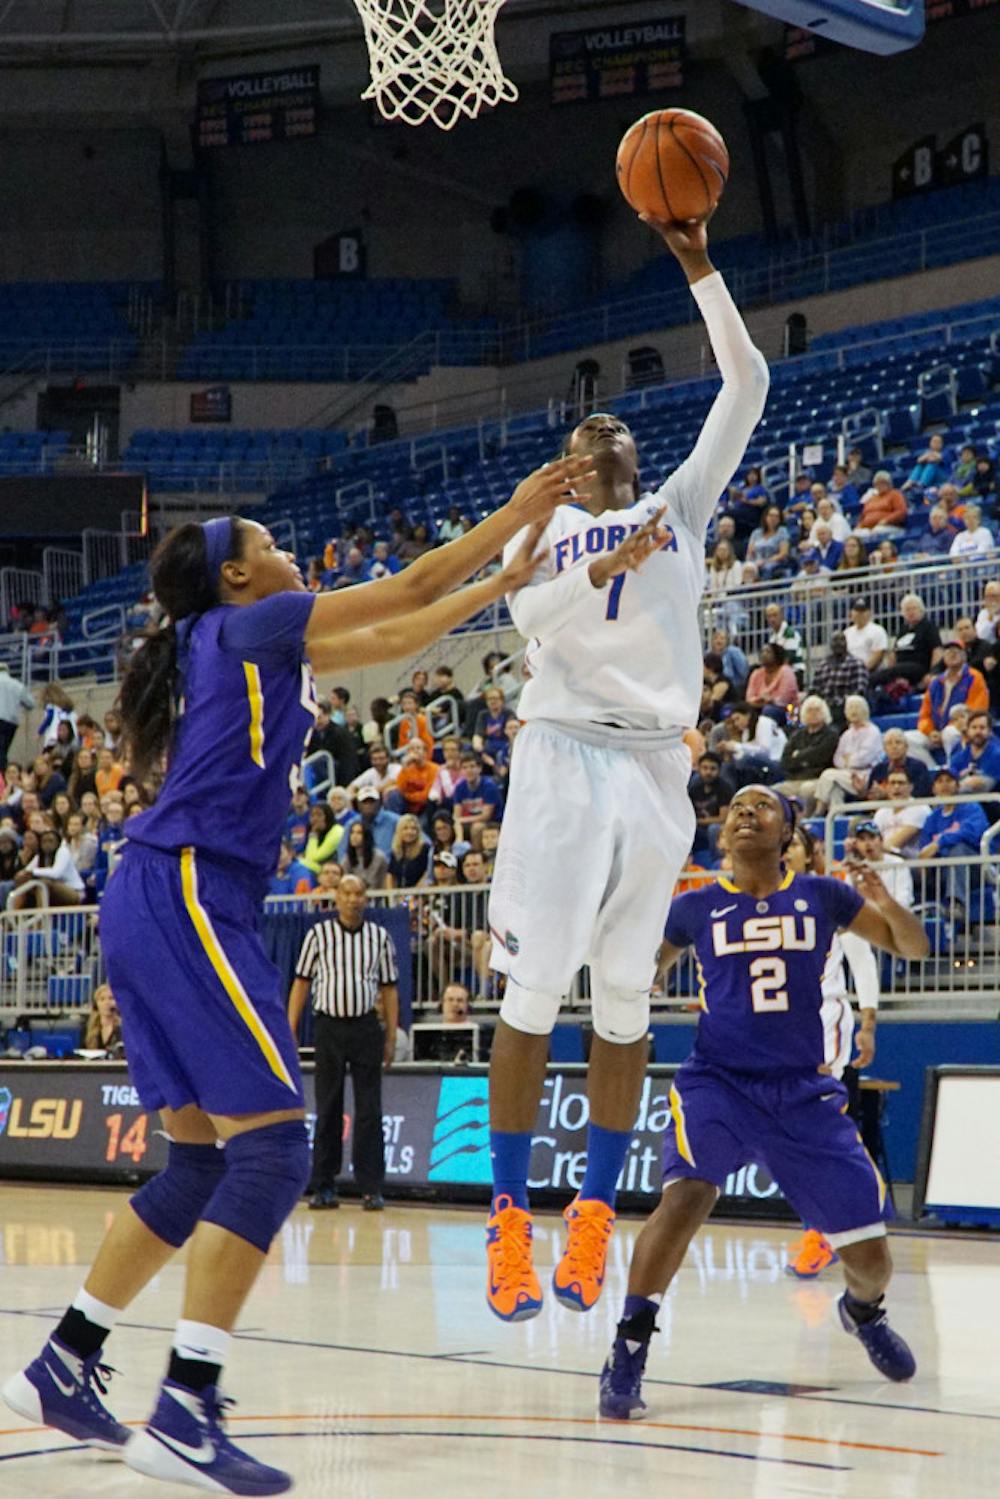 <p>UF forward Ronni Williams goes for a layup during Florida's 53-45 win against LSU on Jan. 17, 2016, in the O'Connell Center.</p>